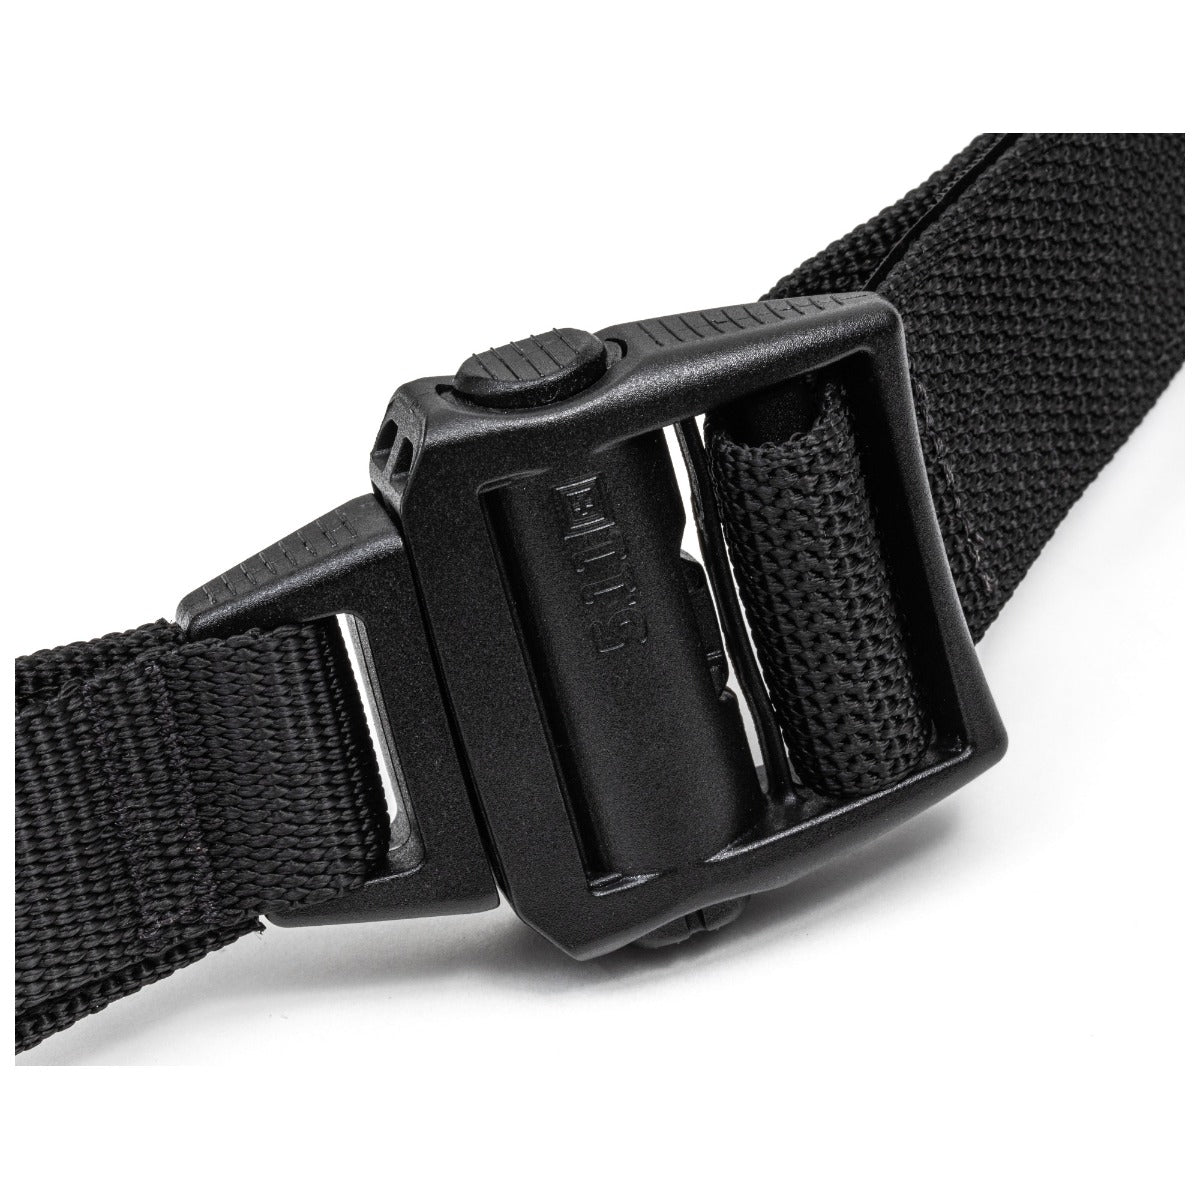 5.11 Tactical Skyhawk 1.5" Belt (56591) | The Fire Center | Fuego Fire Center | Firefighter Gear | Light, sturdy, and completely non-metallic, the Skyhawk Belt secures witha  carefully engineered, POM thermoplastic with a custom designed dual-lock buckle for easy of entry into belt loops with removing the buckle.